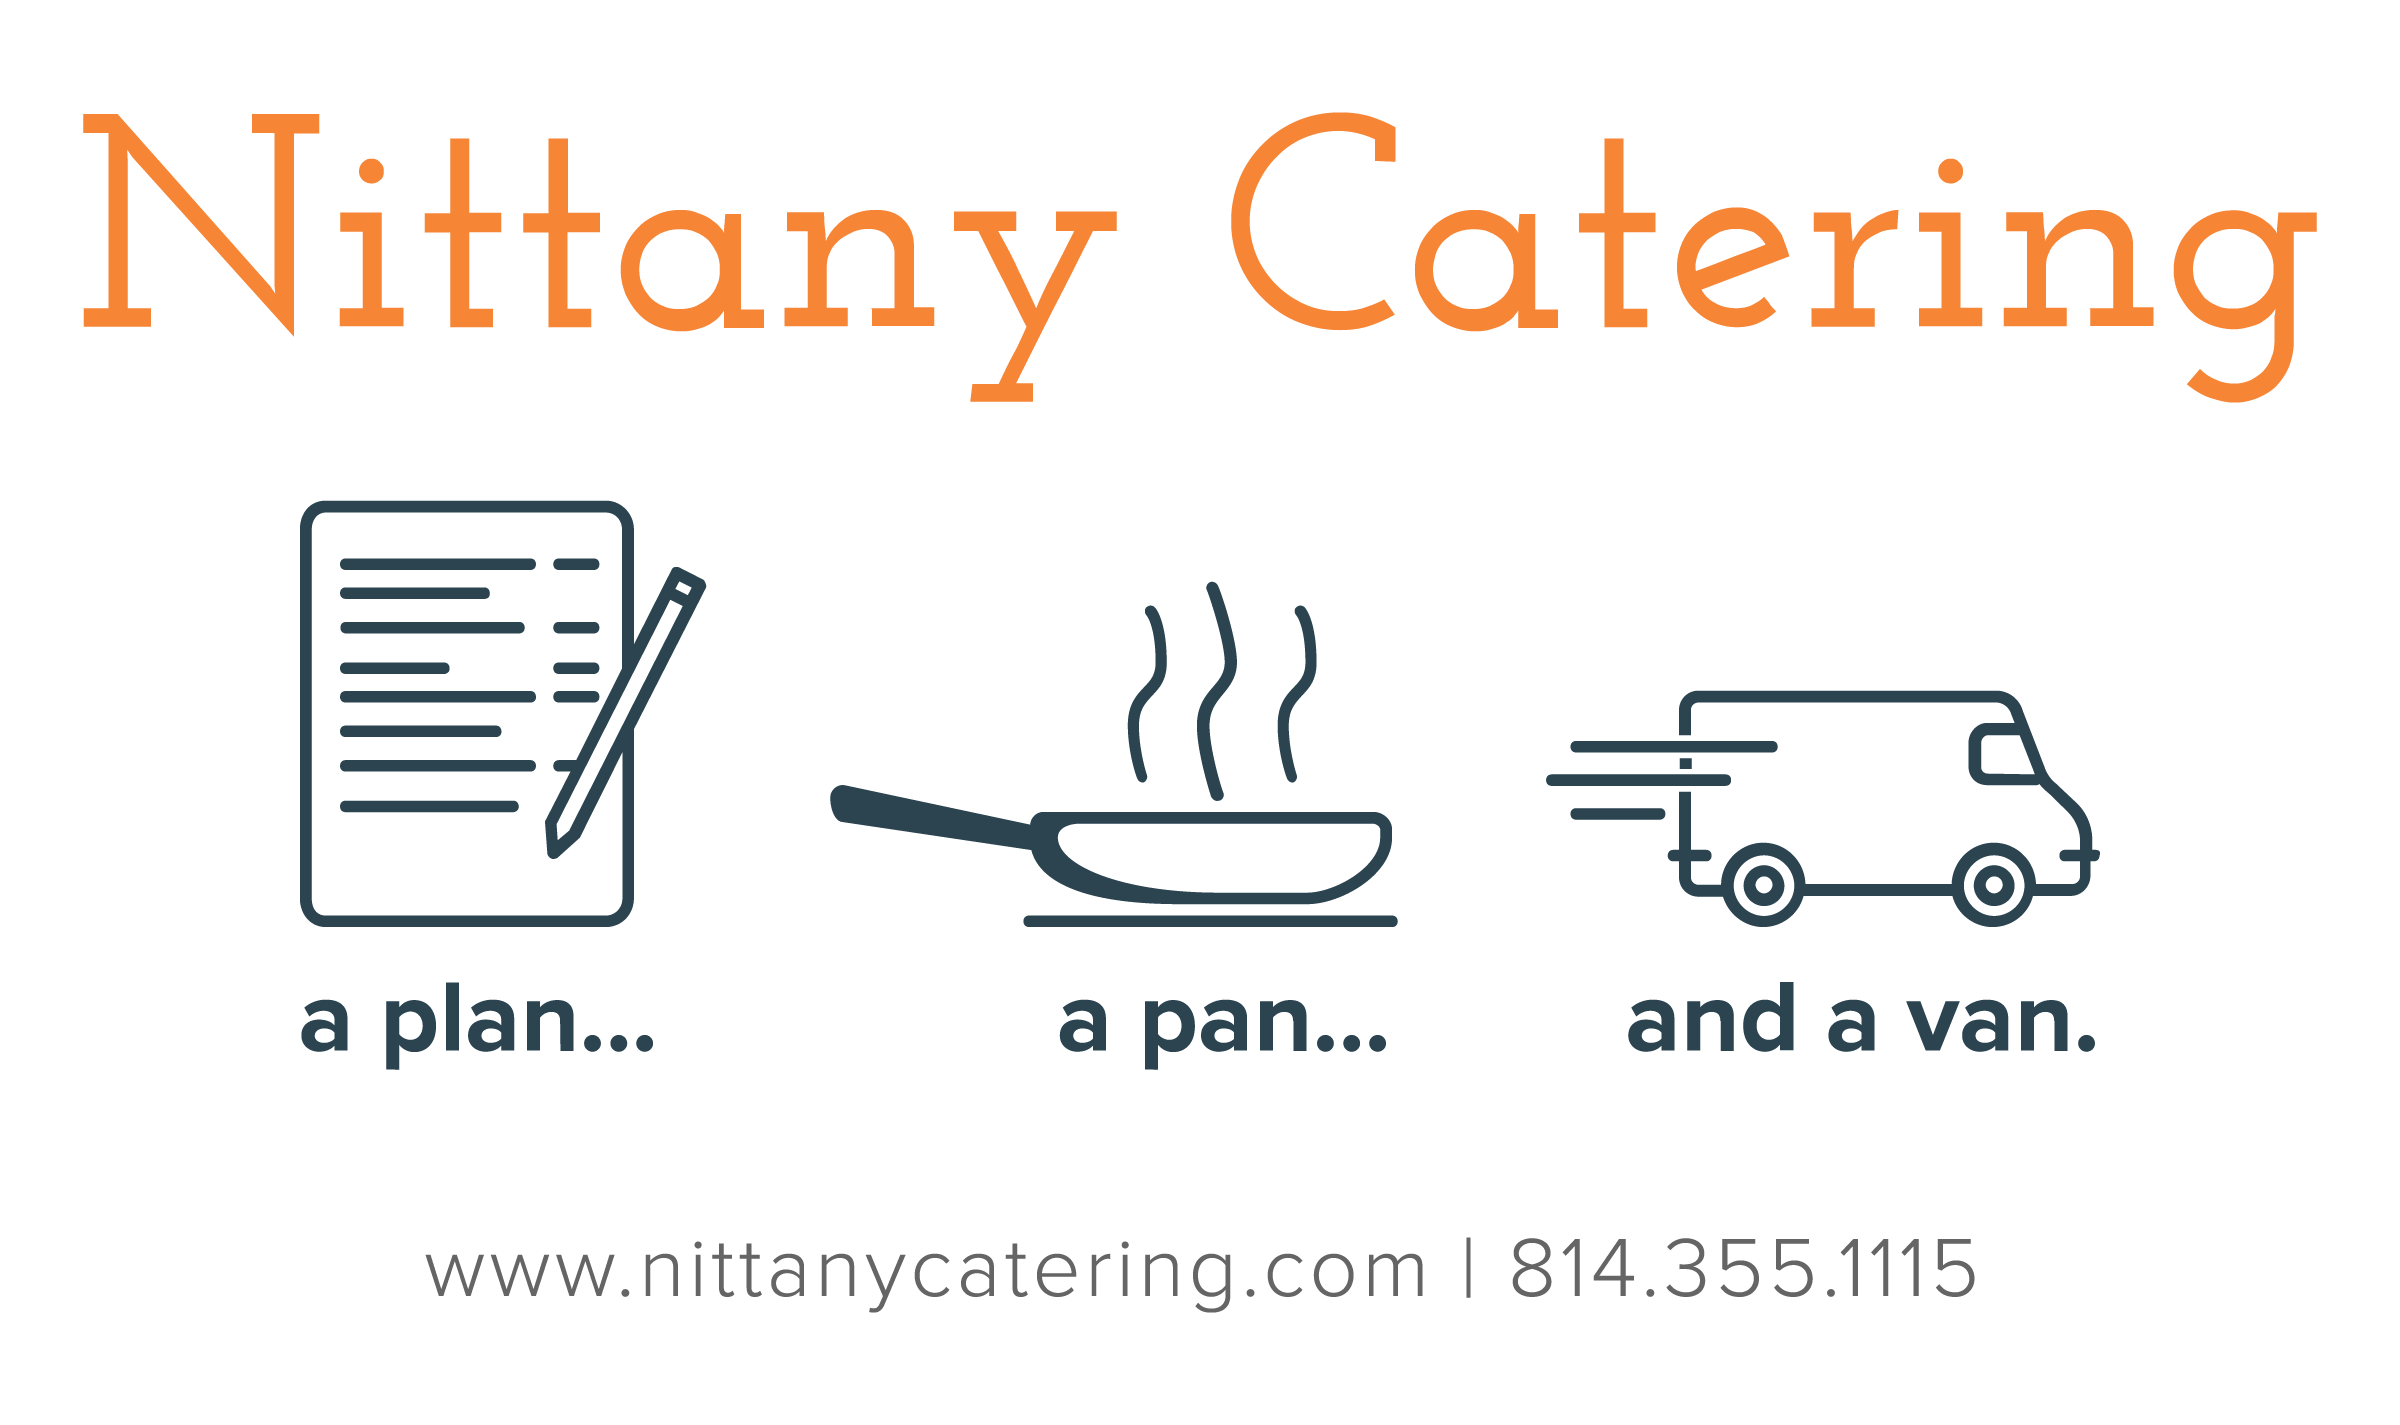 Nittany Catering